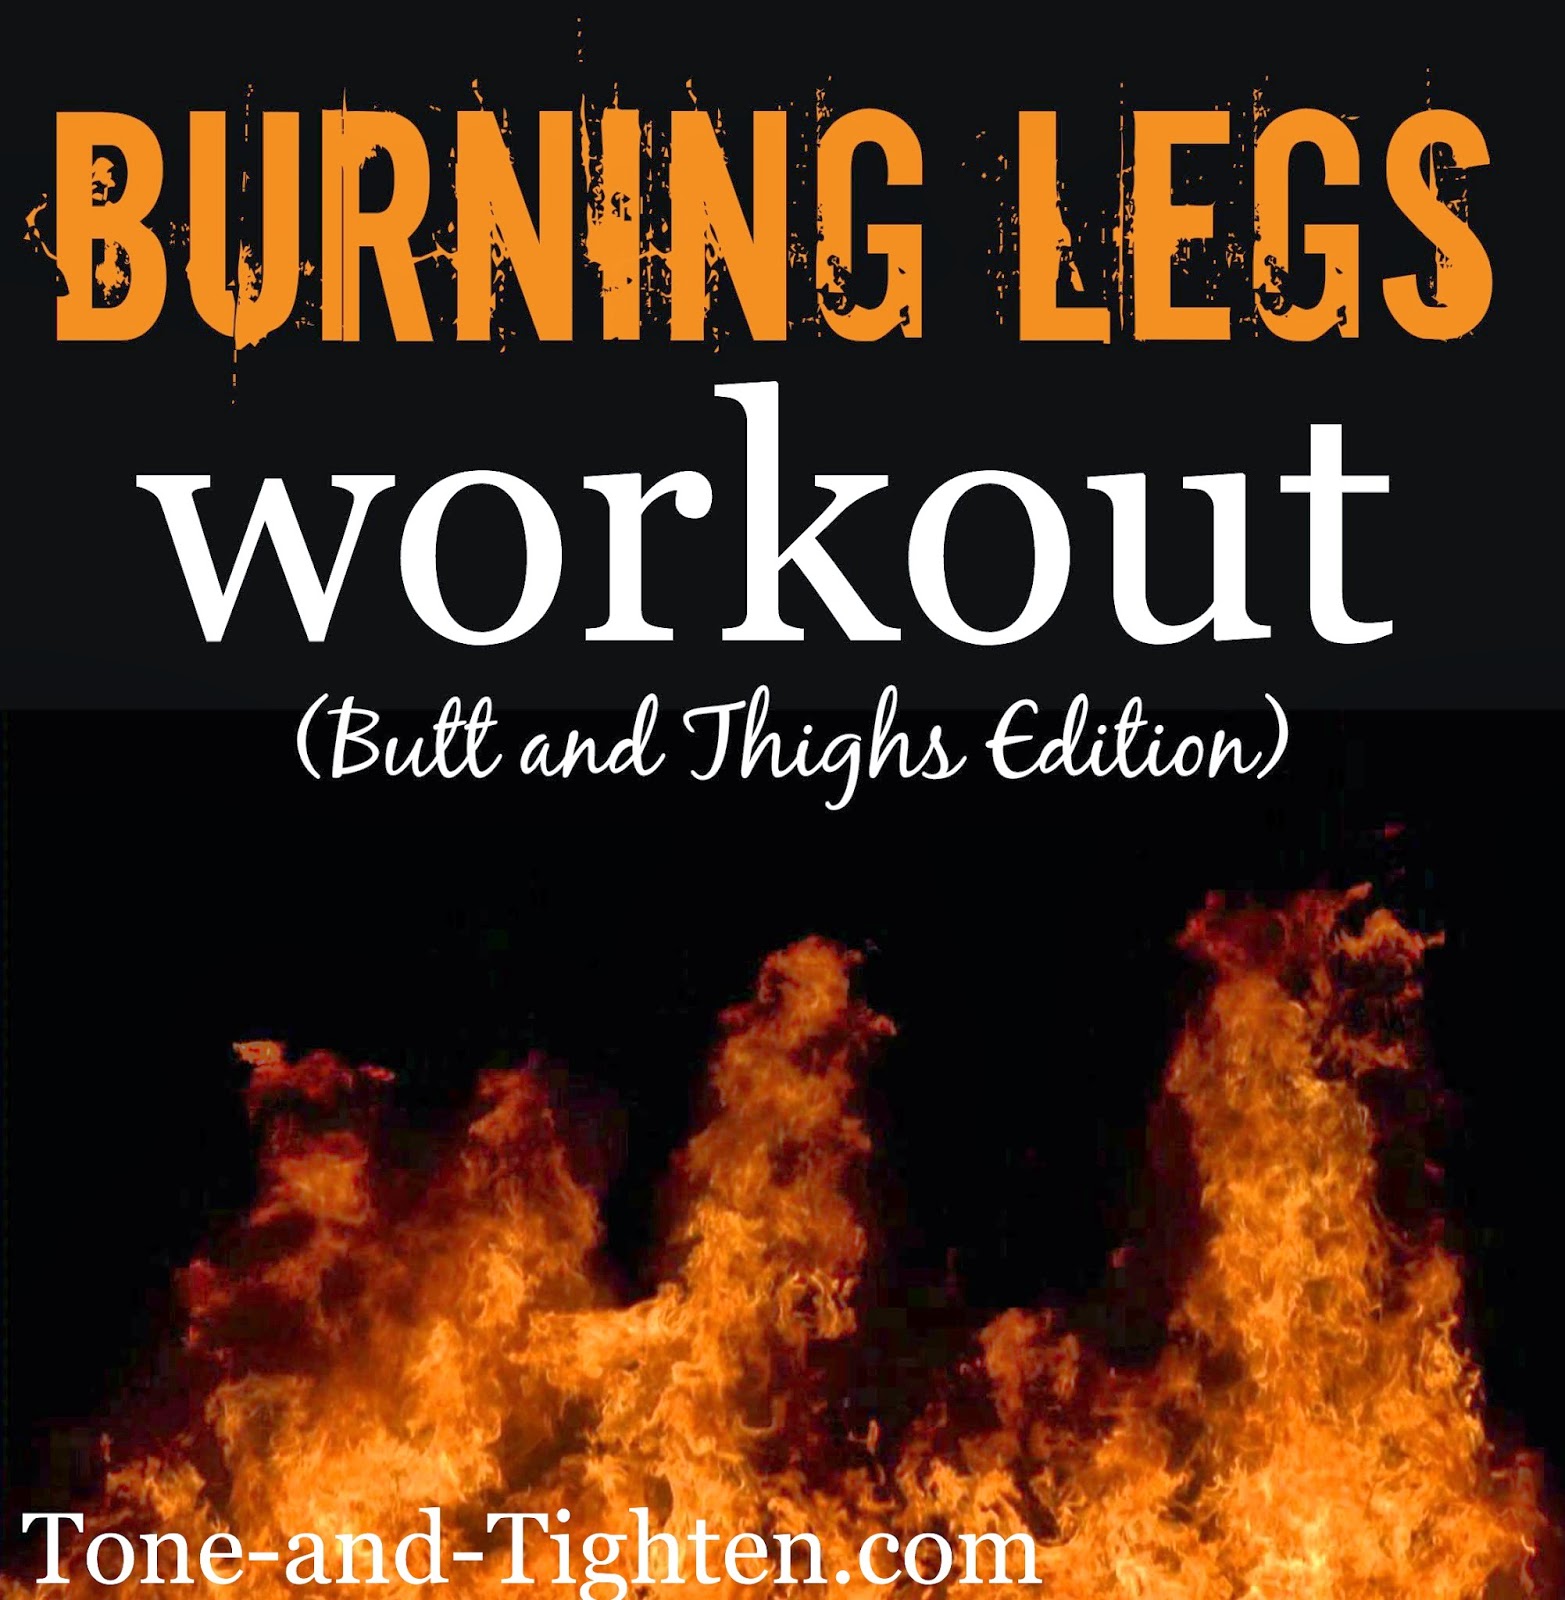 Video Workout: Burning Legs Workout (Butt and Thighs Edition)